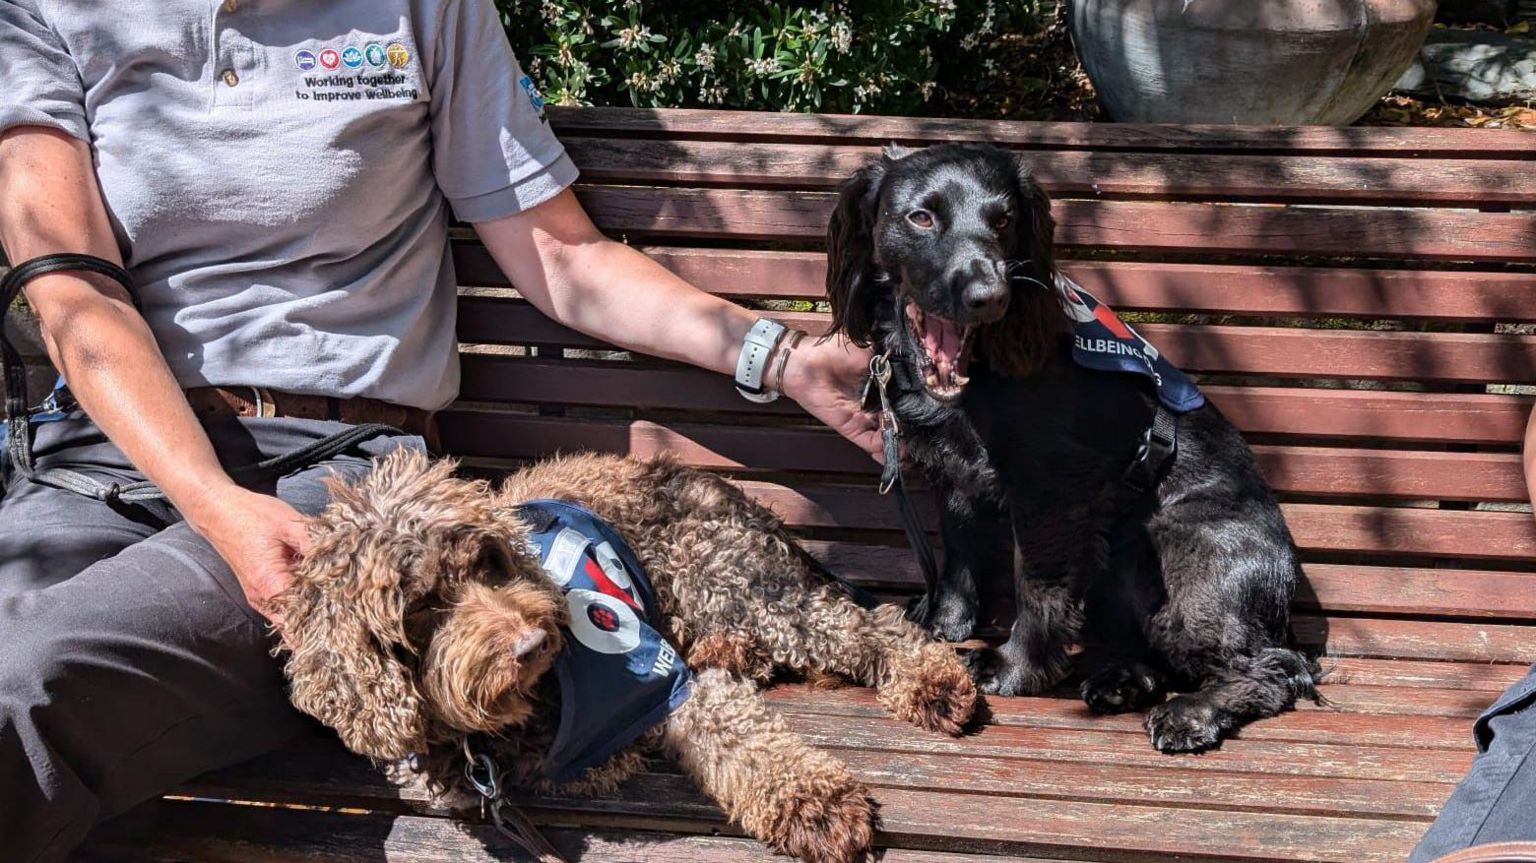 Two police therapy dogs wearing OK9 vests.